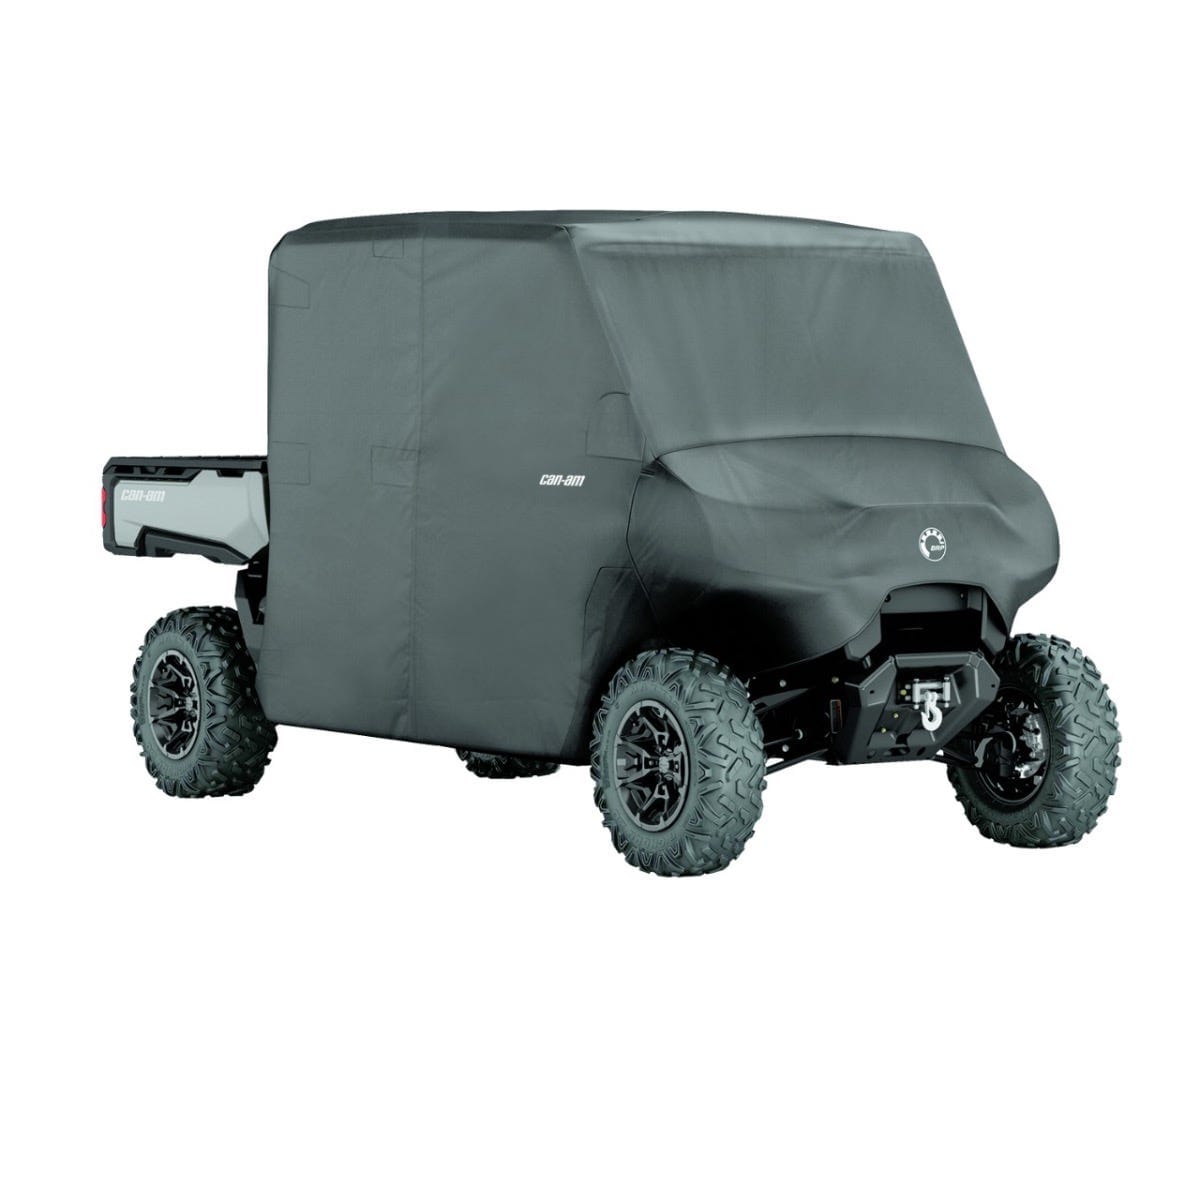 Trailering Cover - Traxter MAX, Defender MAX